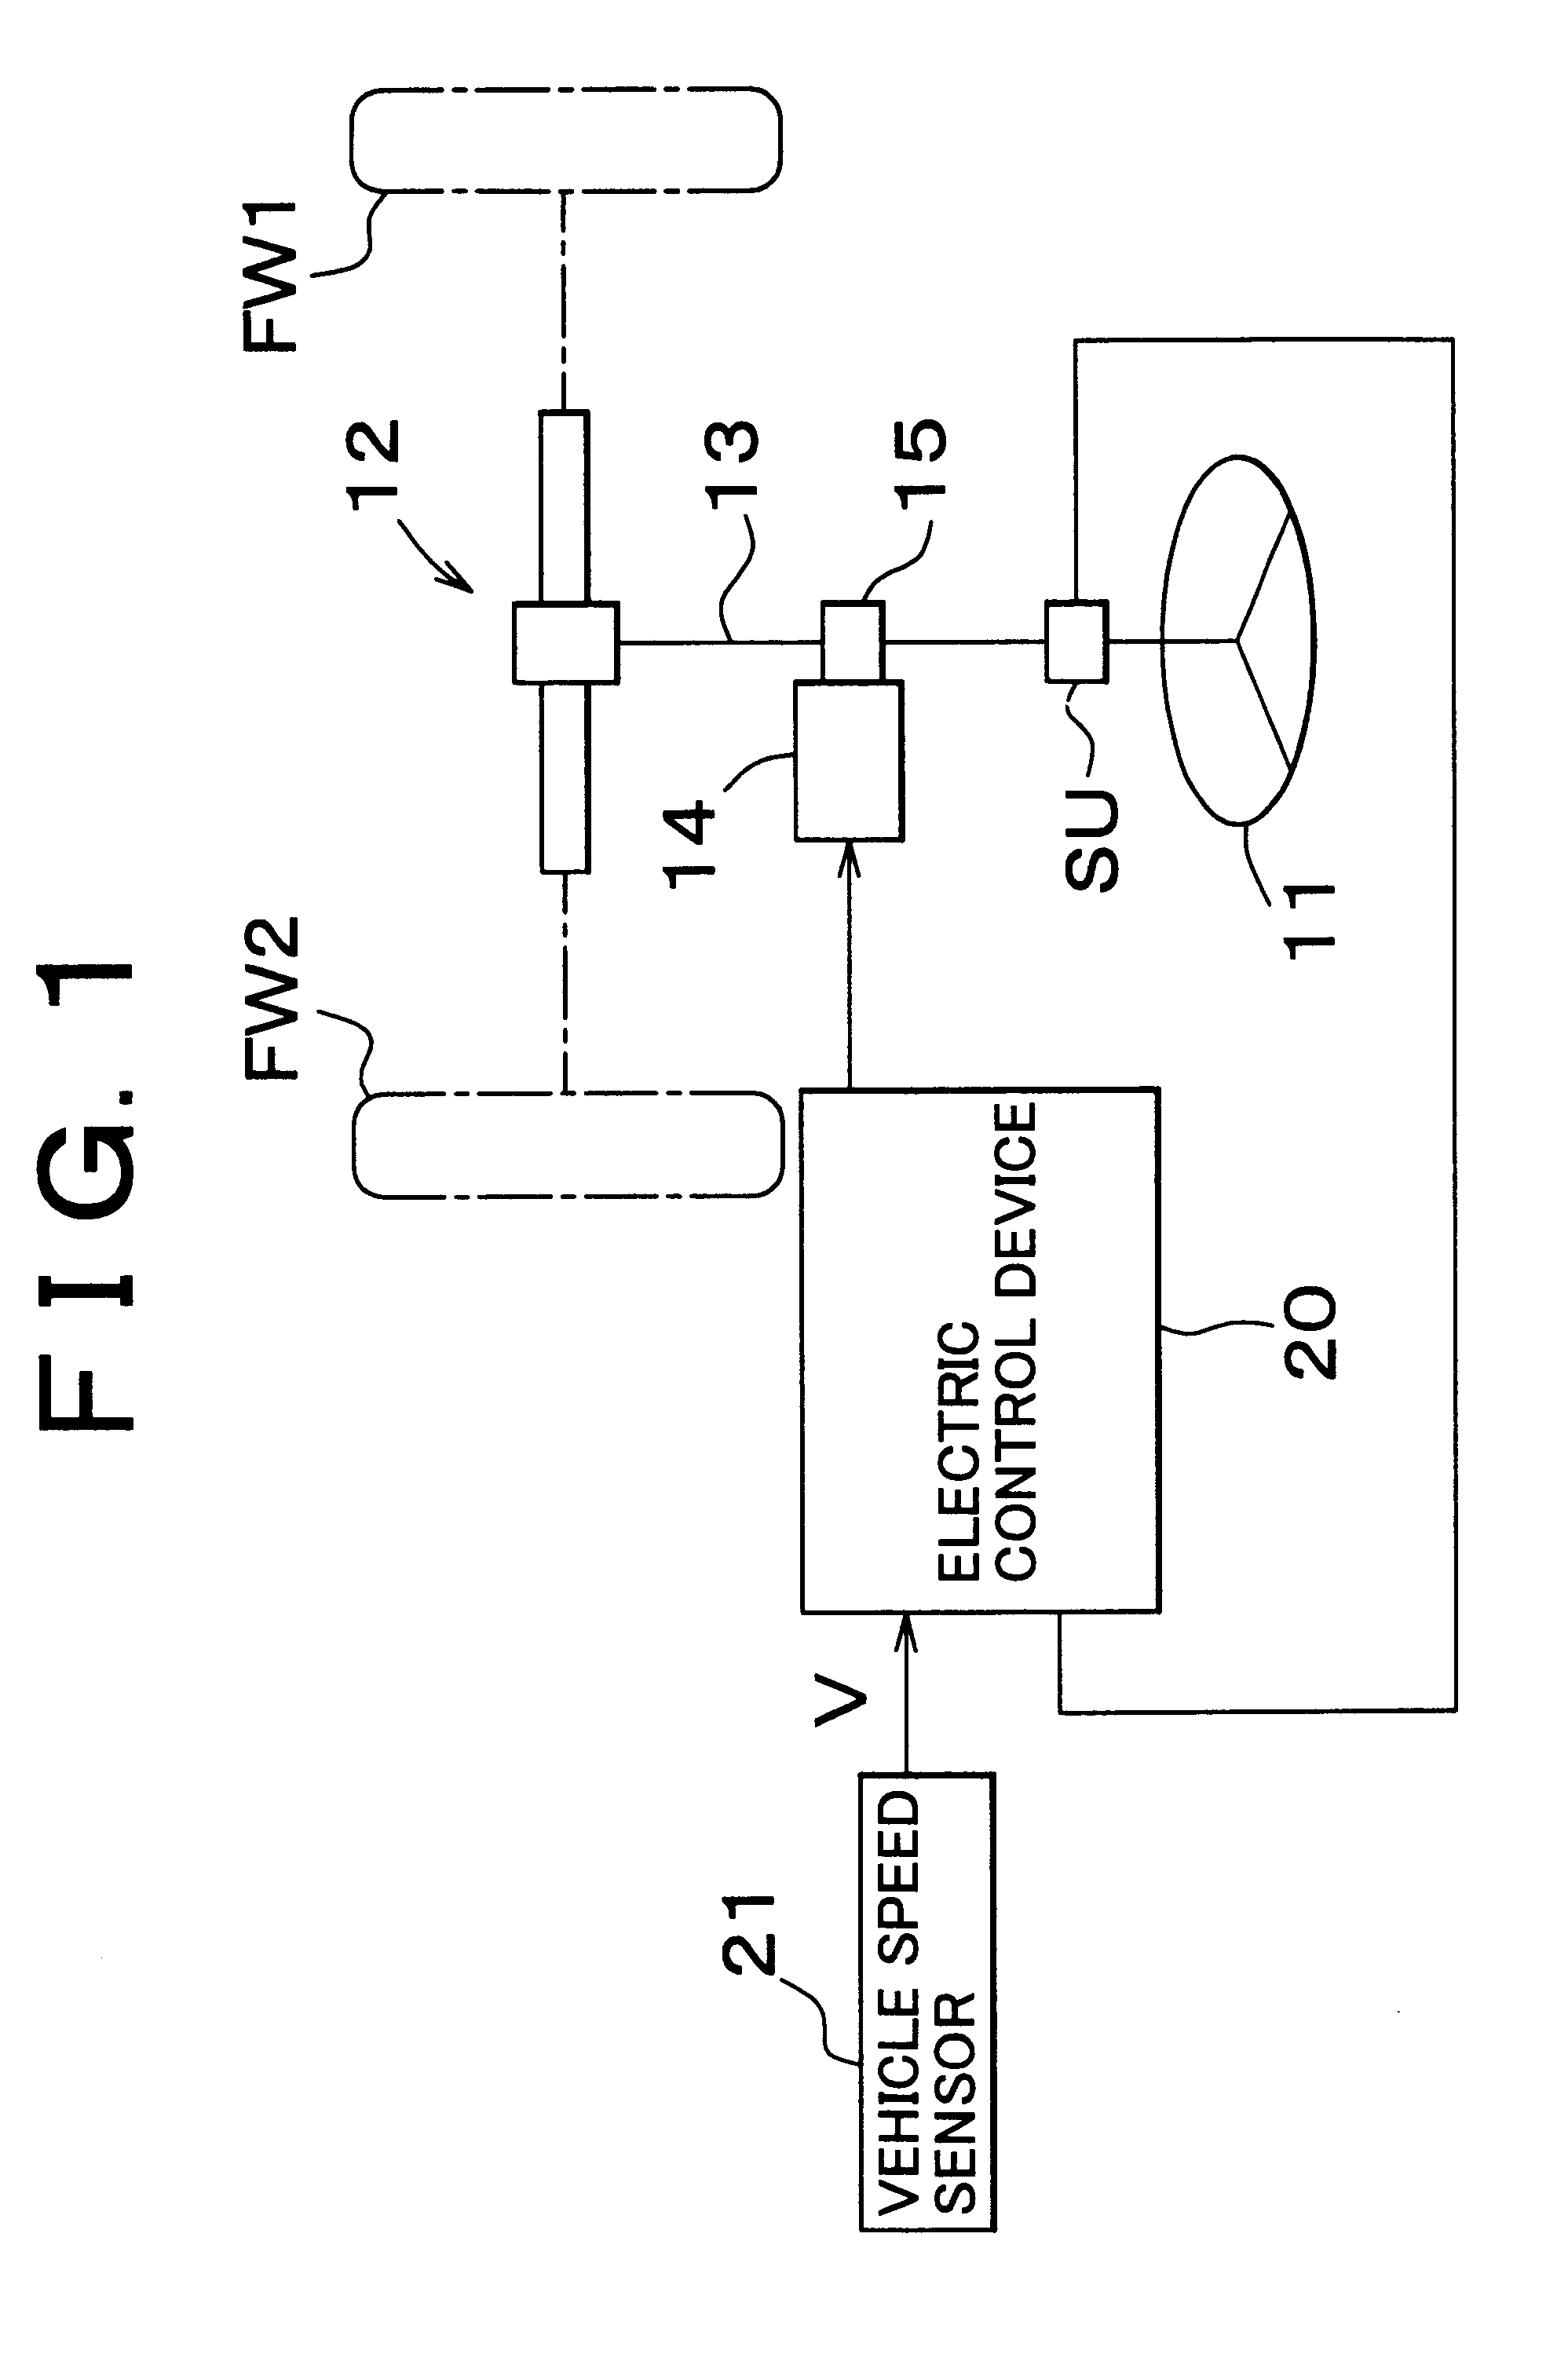 Vehicular electric power steering device and methods for controlling same